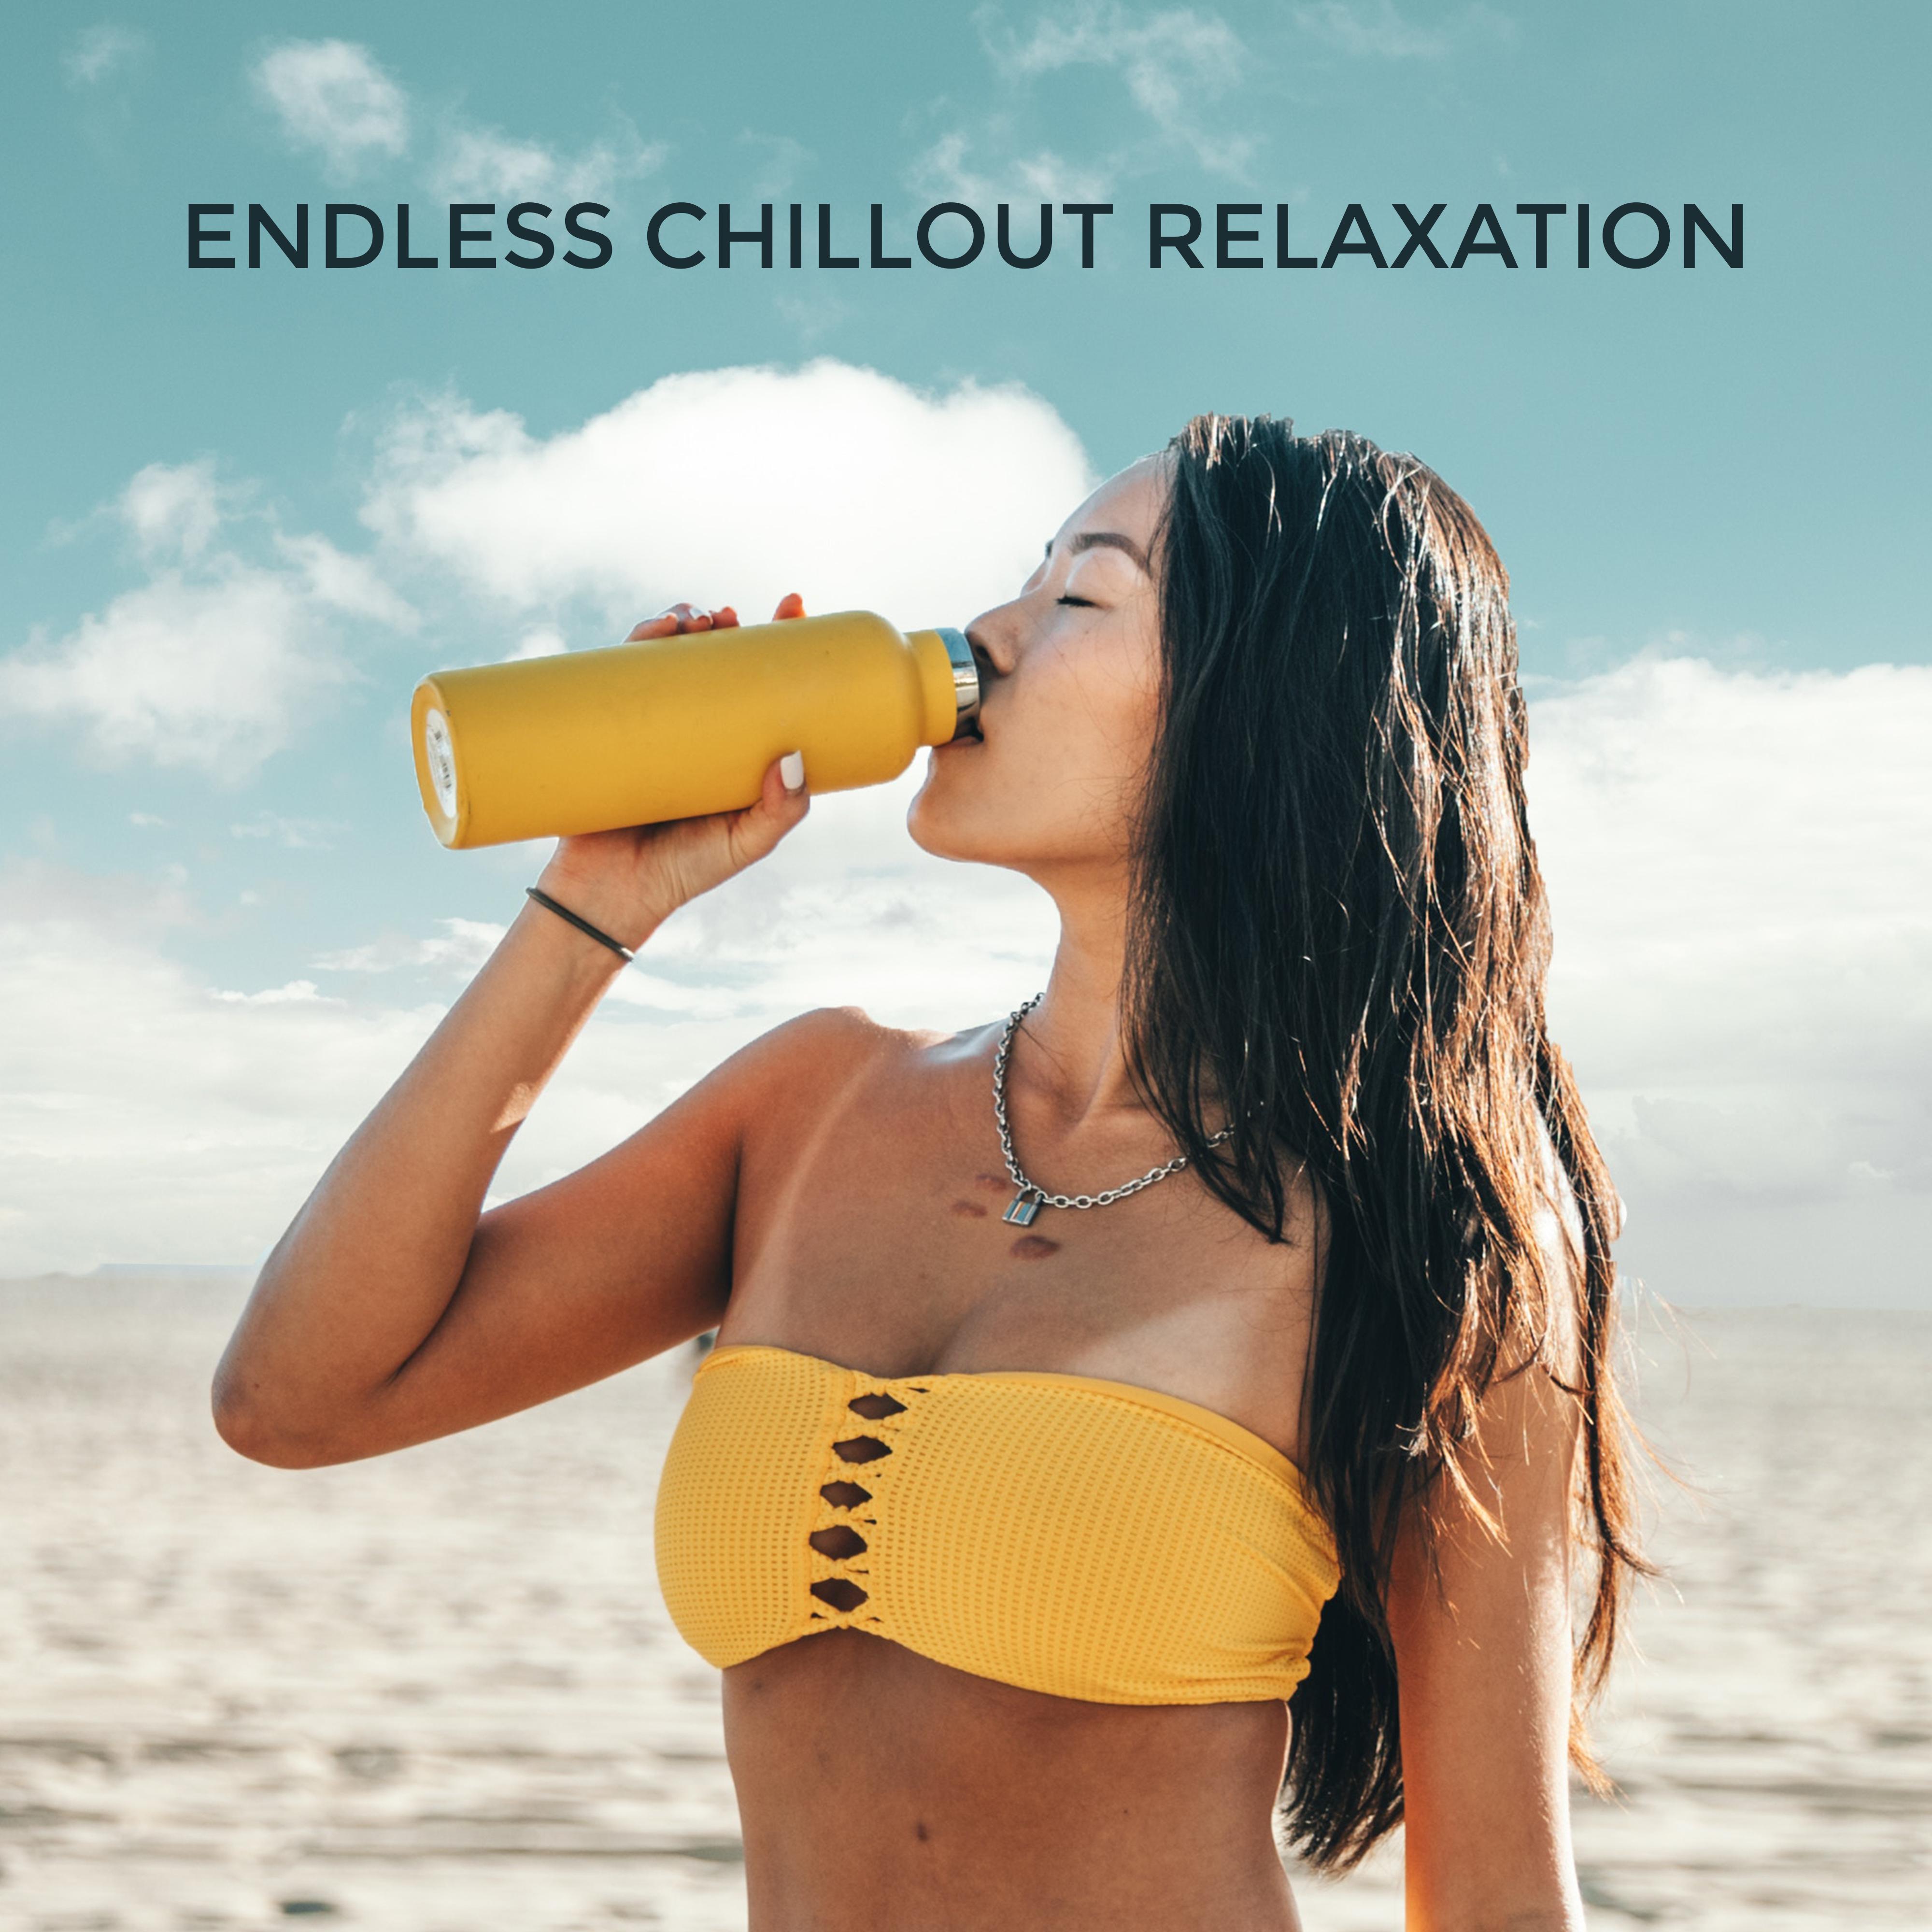 Endless Chillout Relaxation  Compilation of 15 Total Calming Chill Out 2019 Beats, Stress Reducing, Relax After Tough Day, Rest Vibes